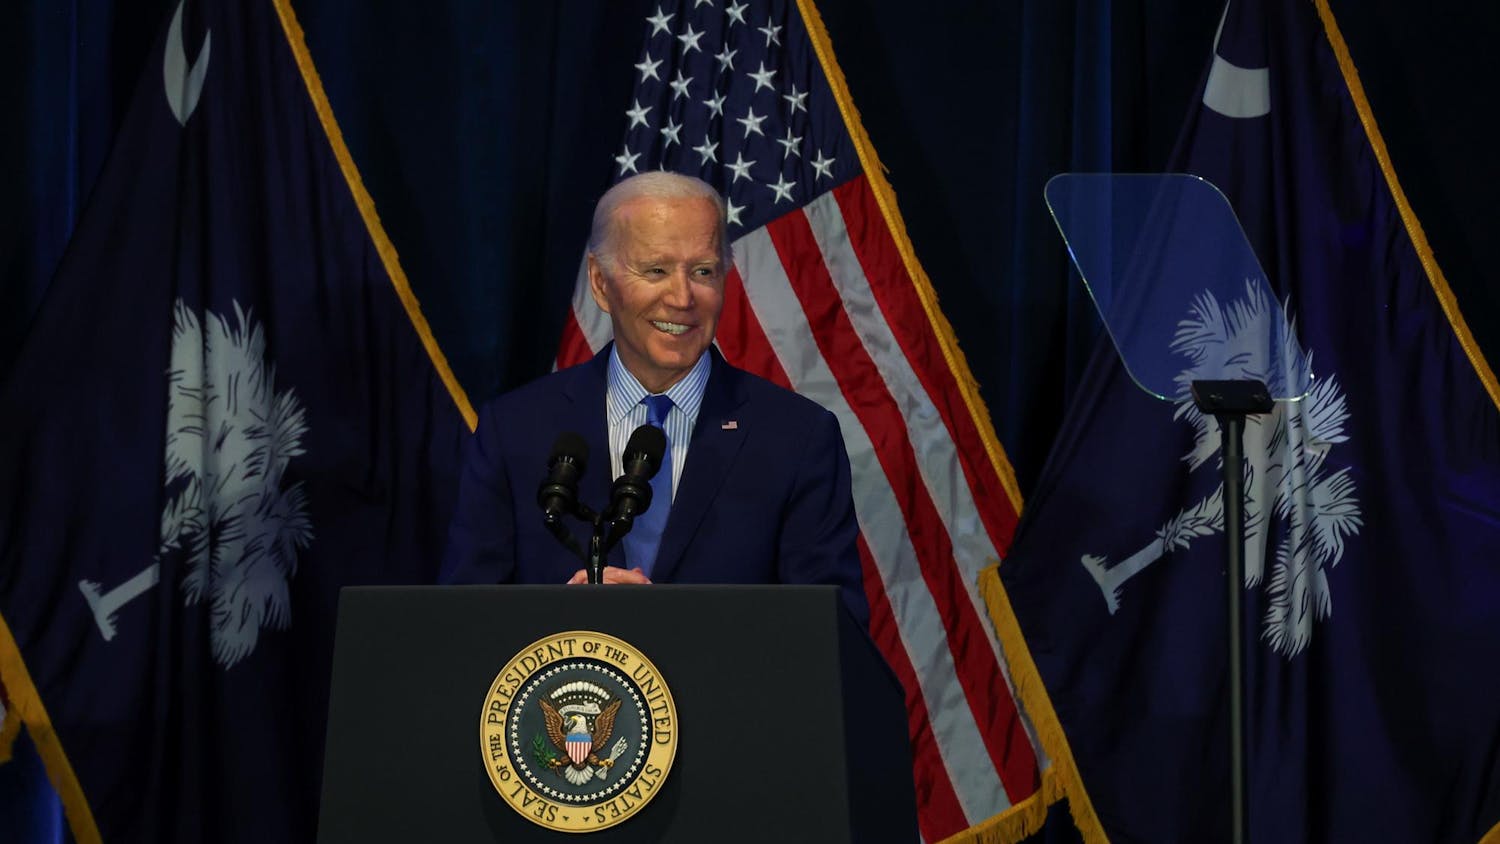 President Joe Biden speaks at the South Carolina Democratic Party's "First in the Nation" dinner in Columbia, SC on Jan. 27, 2024. President Biden spoke passionately about his time so far in office, repeating the phrase "promises made and promises kept" throughout his speech.